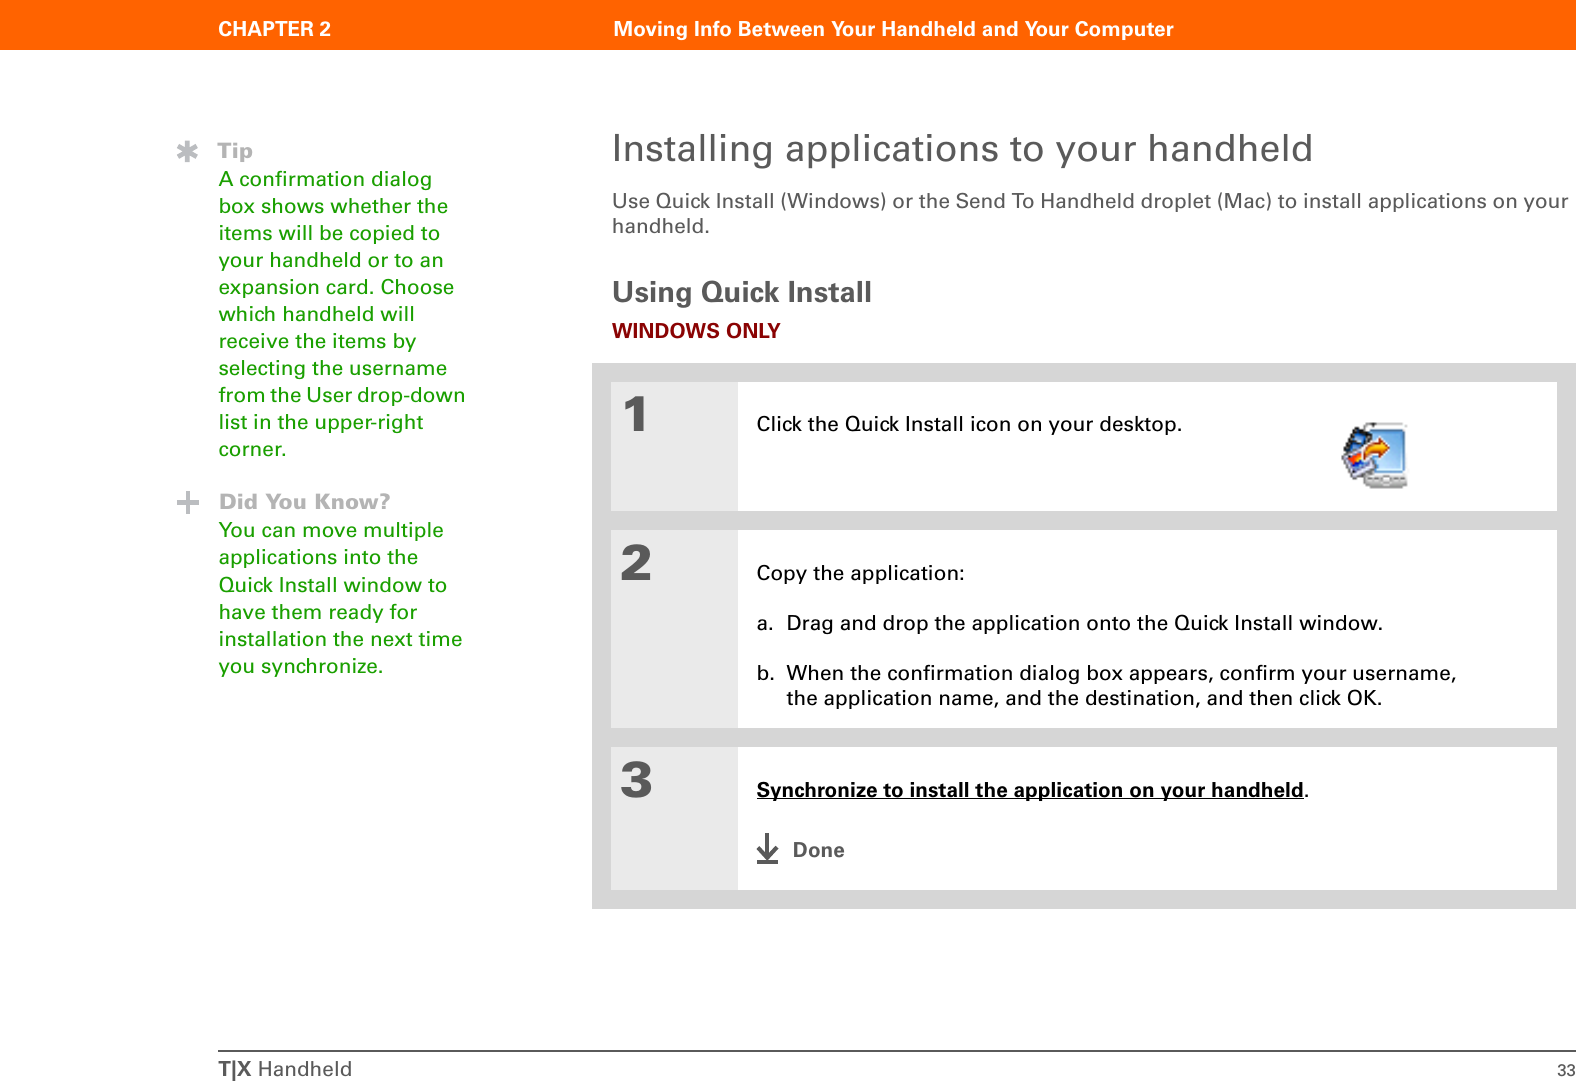 CHAPTER 2 Moving Info Between Your Handheld and Your ComputerT|X Handheld 33Installing applications to your handheldUse Quick Install (Windows) or the Send To Handheld droplet (Mac) to install applications on your handheld. Using Quick InstallWINDOWS ONLY01Click the Quick Install icon on your desktop.2Copy the application:a. Drag and drop the application onto the Quick Install window.b. When the confirmation dialog box appears, confirm your username, the application name, and the destination, and then click OK.3Synchronize to install the application on your handheld.DoneTipA confirmation dialog box shows whether the items will be copied to your handheld or to an expansion card. Choose which handheld will receive the items by selecting the username from the User drop-down list in the upper-right corner.Did You Know?You can move multiple applications into the Quick Install window to have them ready for installation the next time you synchronize.